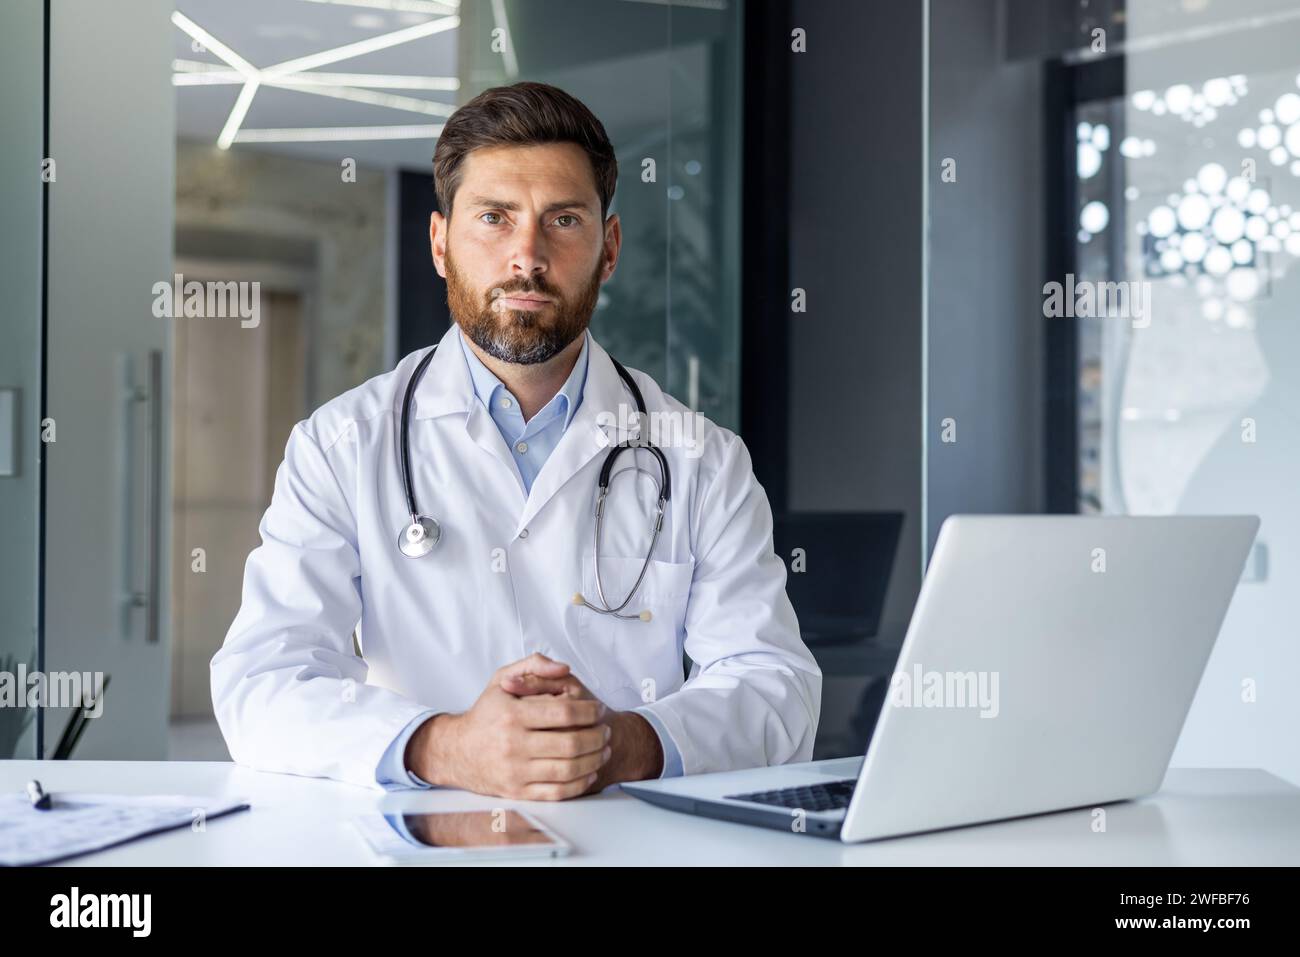 Portrait of a young male doctor sitting in a slaughterhouse office at a desk in a white coat, looking seriously and focused into the camera. Stock Photo